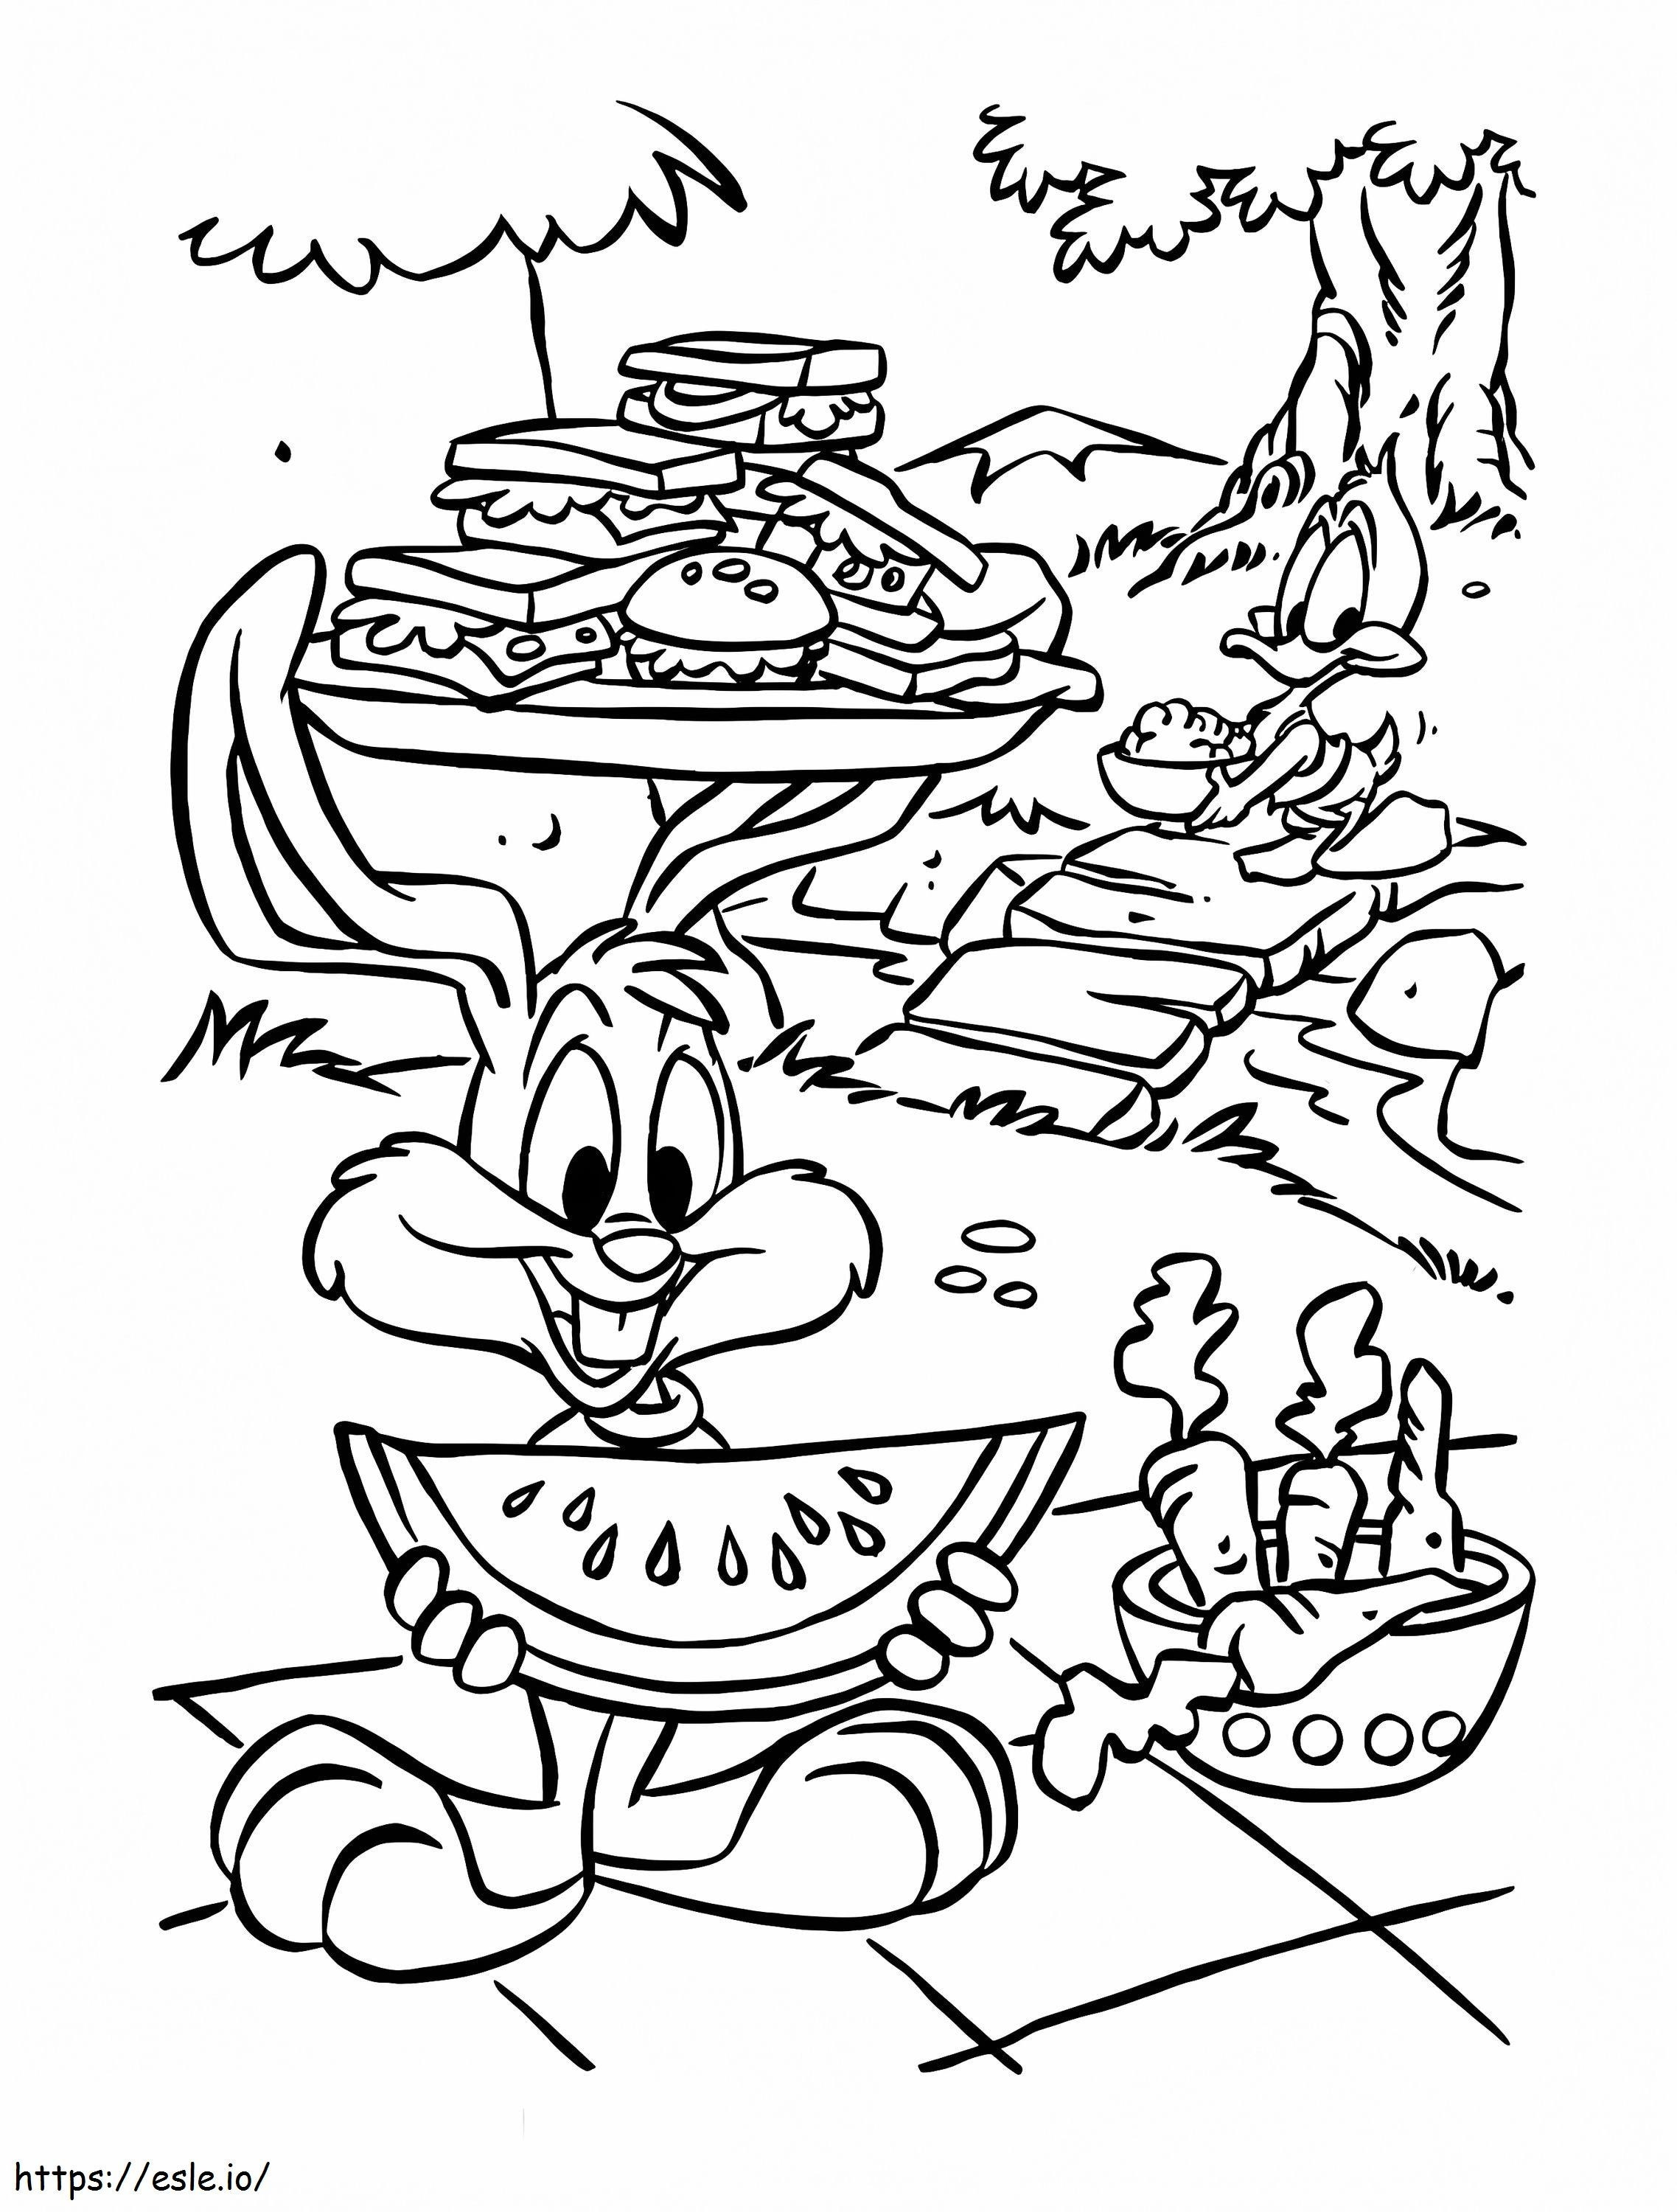 Buster Bunny On A Picnic coloring page